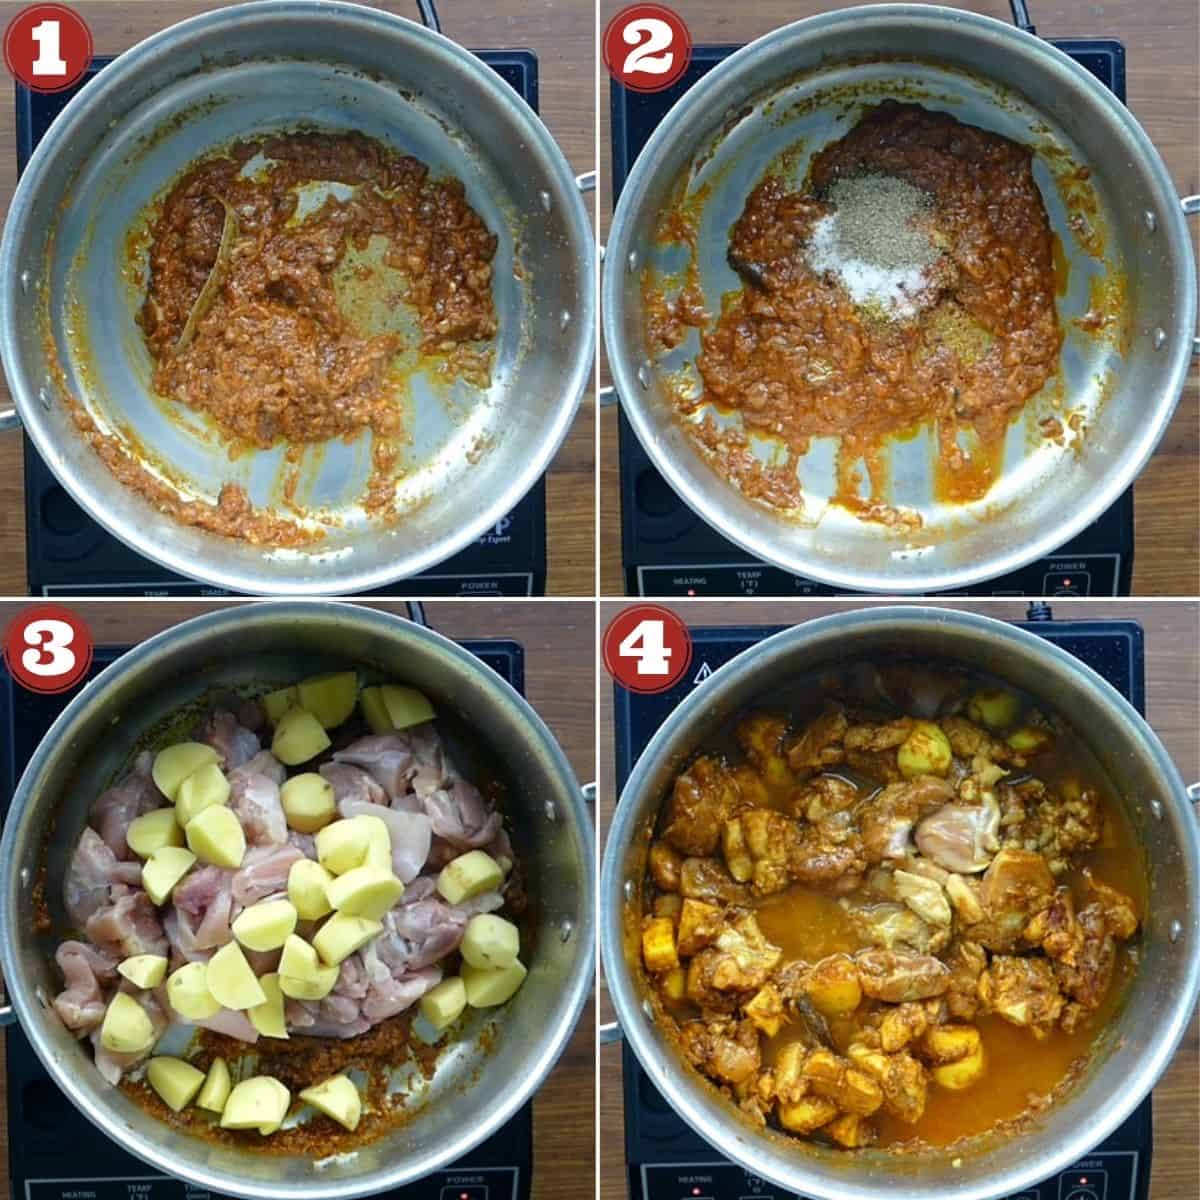 Kerala chicken curry instructions collage - fry tomatoes, spices, and add chicken and potatoes with broth.